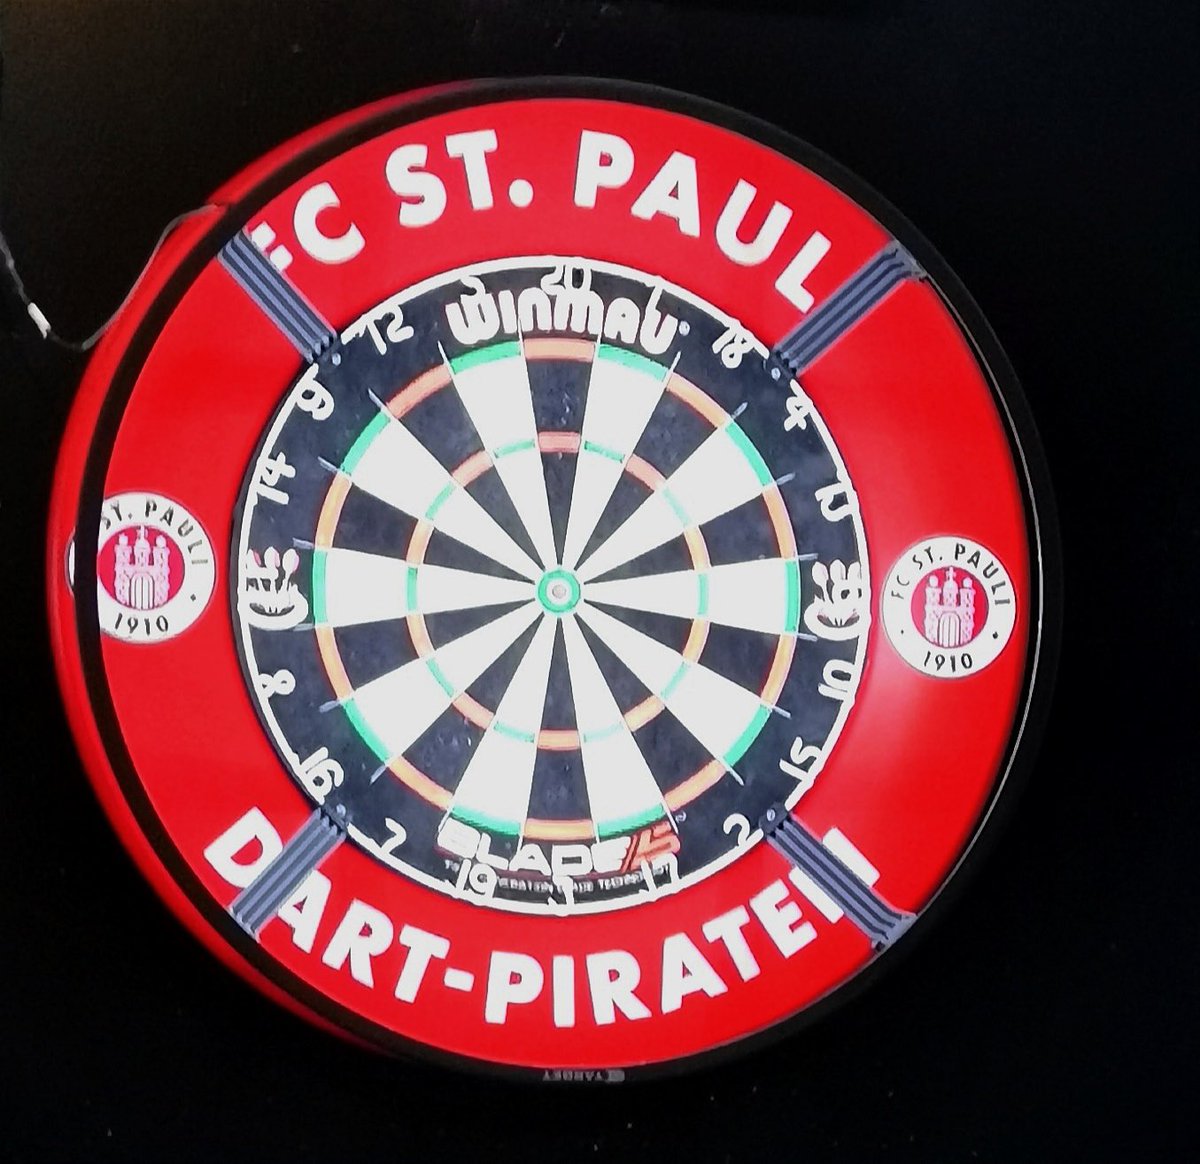 🚨ANNOUNCEMENT🚨 We’re taking a leaf out of St.Pauli Dart-Piraten’s book & taking part in a darts tournament with our friends @sosemtcc & @RunFreeOfficial benefitting @SouthendFoodBan taking place at @sosemtcc from 7pm on Sunday May 26th! Details to follow! 🎯#fcsp 📸 @fcstpauli